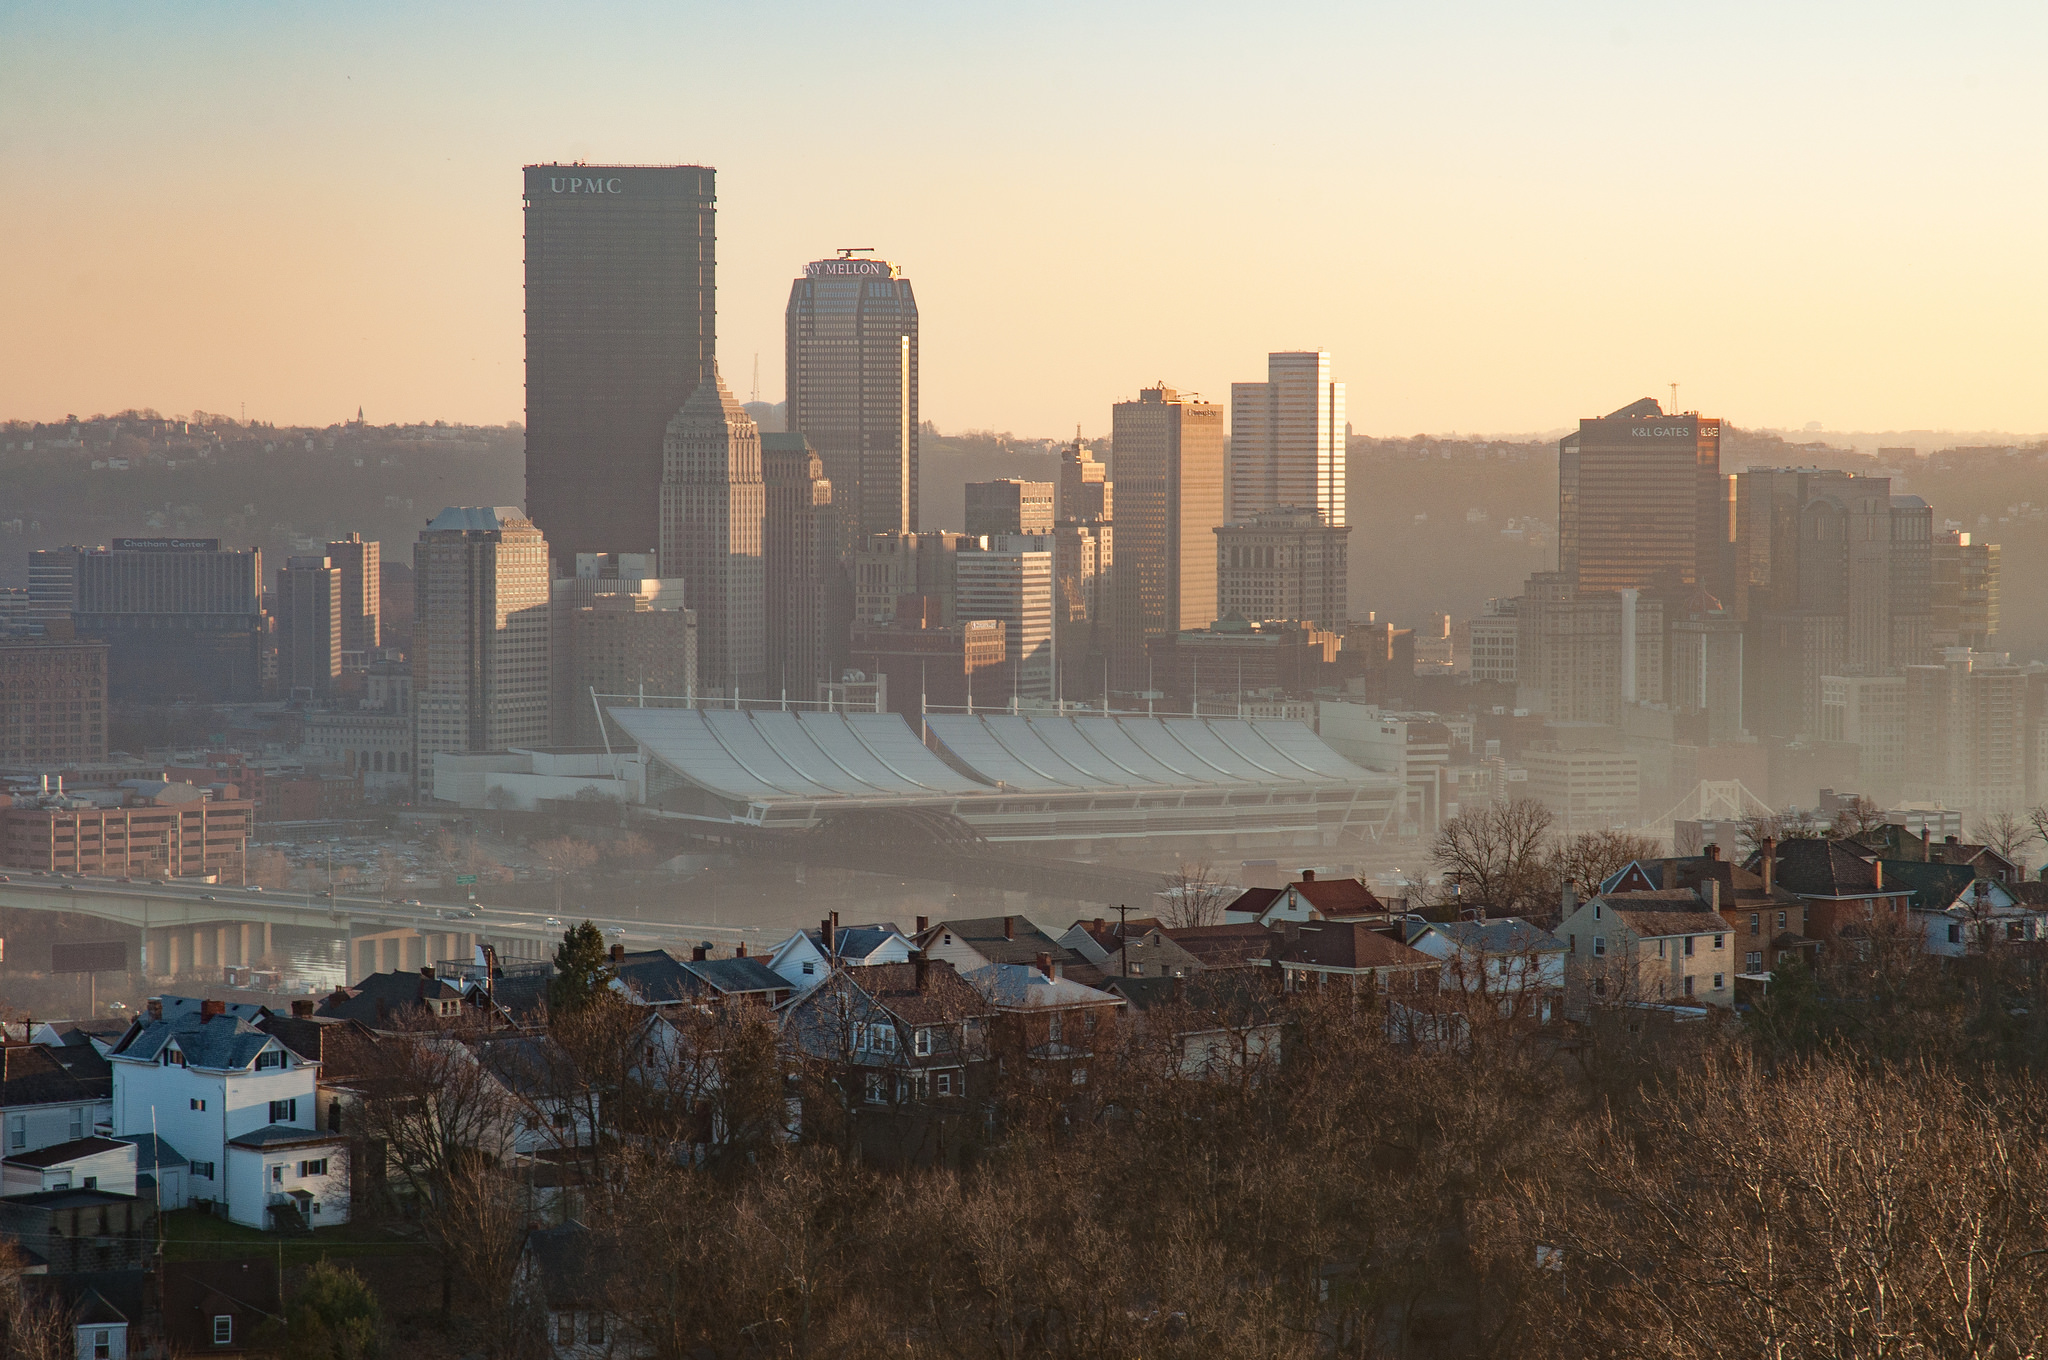 On many days, Pittsburgh's air pollution is hard to ignore. Even with recent improvements in air quality, Allegheny County still does not meet federal air-quality standards for fine-particulate pollution. Photo: Matt Niemi via Flickr